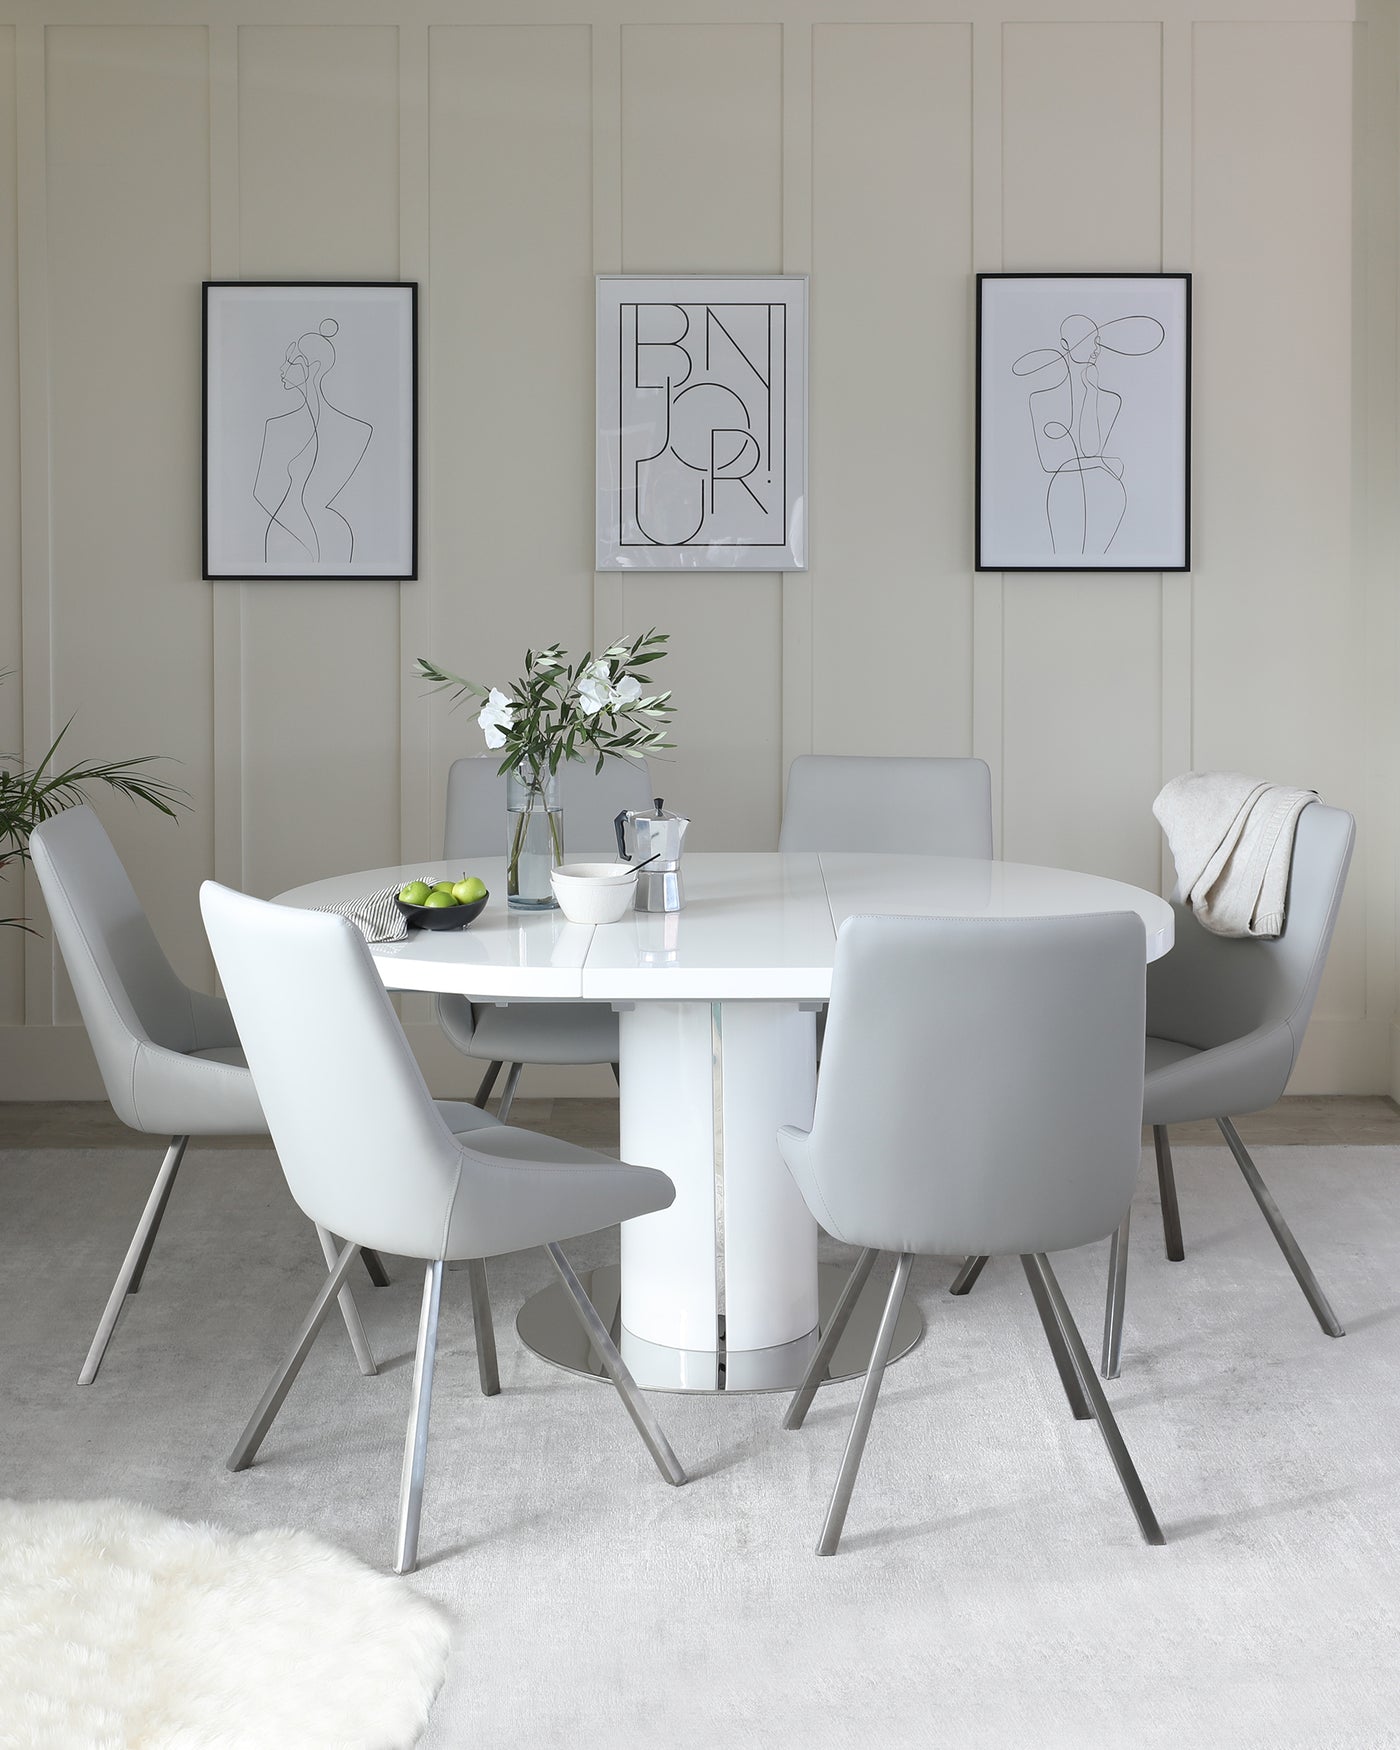 Modern dining room furniture featuring a white, round dining table with a reflective metal base, surrounded by six light grey, sleek upholstered chairs with slender metal legs. A cosy white fur rug lies beneath, adding warmth to the space.